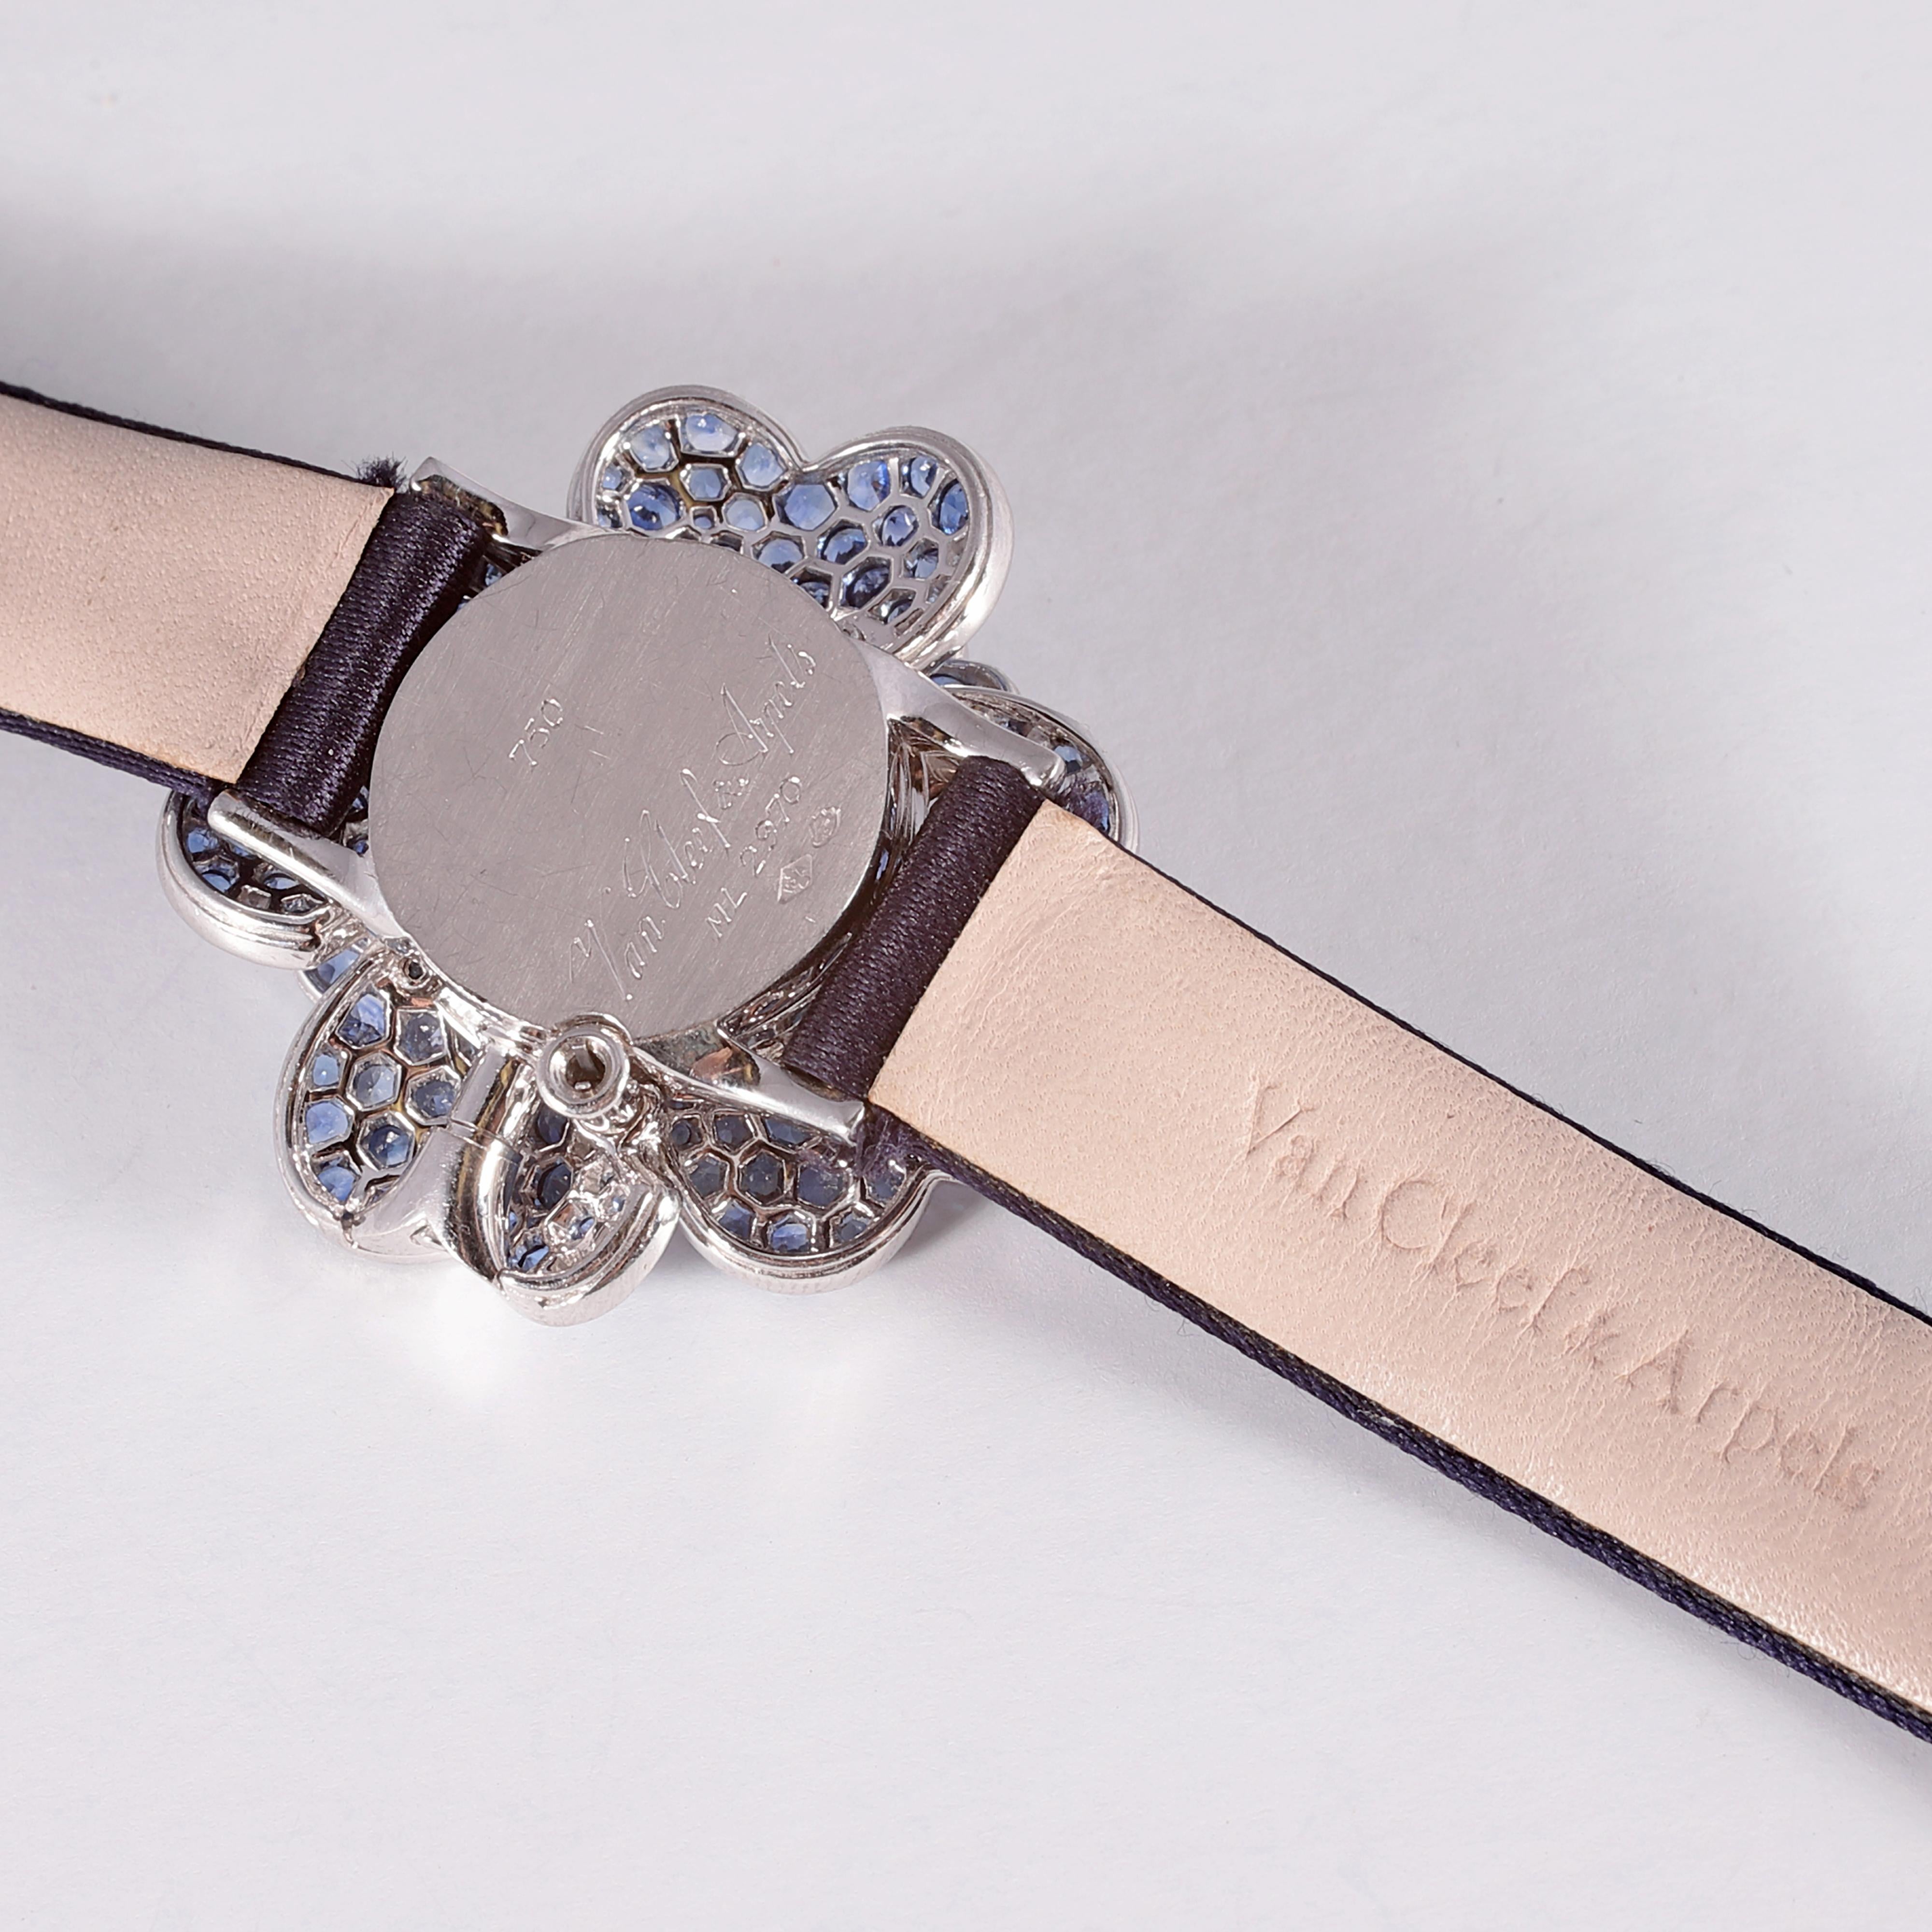 This Van Cleef & Arpels high jewelry Cosmos wristwatch is like having a flower filled, secret garden on your wrist!   
The legendary history of fine jewelry and watch maison Van Cleef & Arpels all started with the love story between Alfred Van